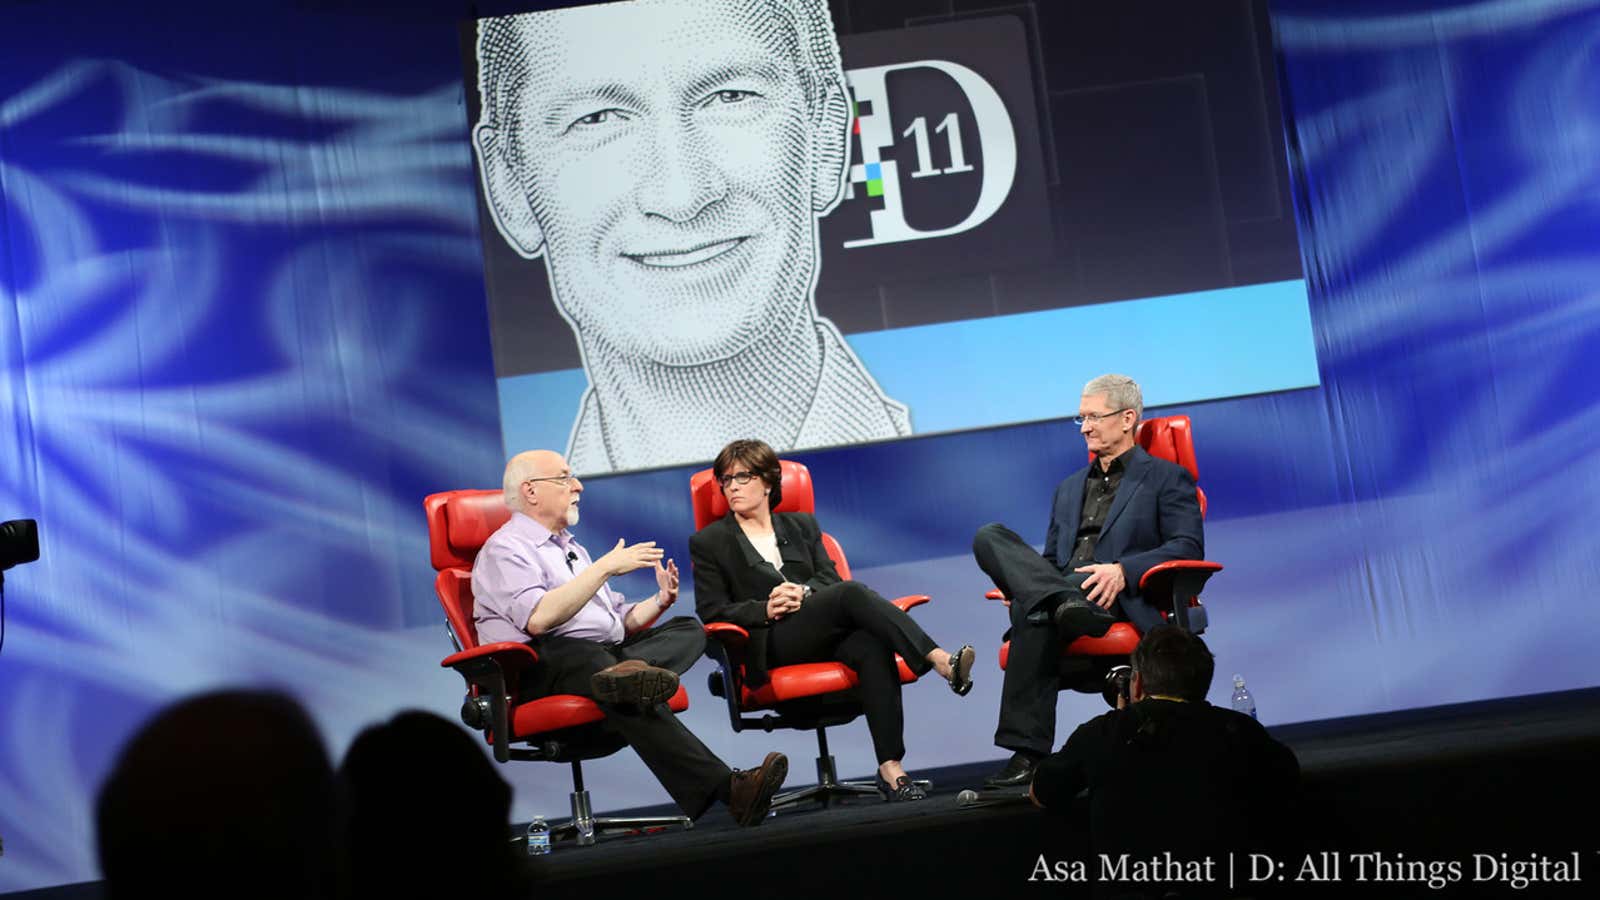 Mossberg and Swisher onstage earlier this year with Apple CEO Tim Cook.